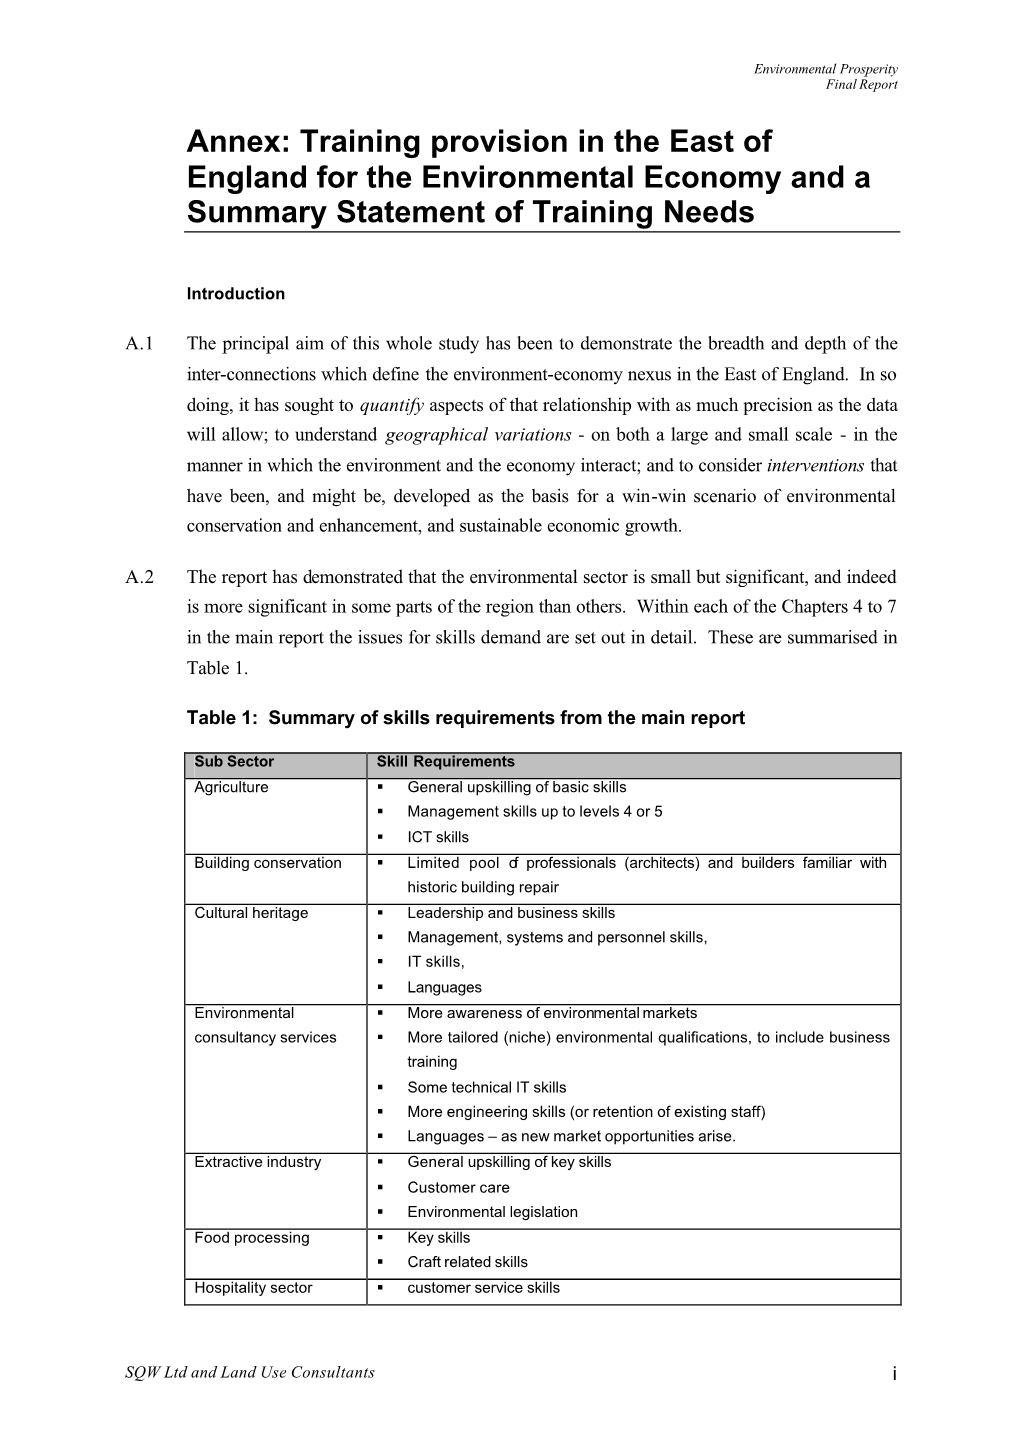 Annex: Training Provision in the East of England for the Environmental Economy and a Summary Statement of Training Needs